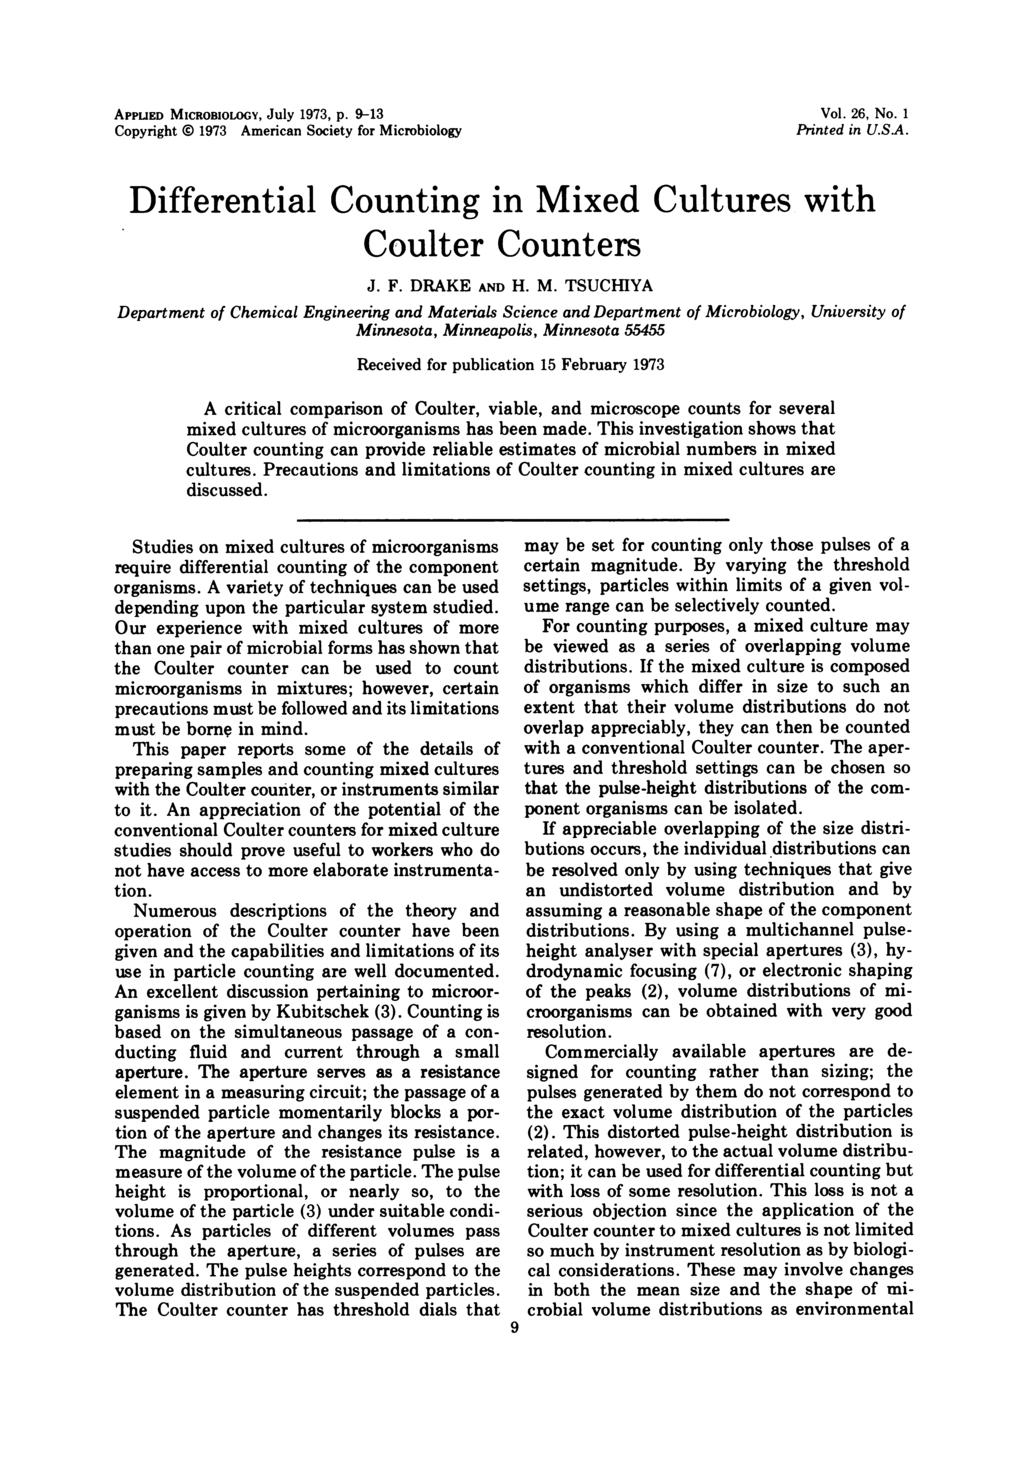 APPUED MICROBILOGY, JUlY 1973, p. 9-13 Copyright 0 1973 American Society for Microbiology Vol. 26, No. 1 Printed in U.S.A. Differential Counting in Mixed Cultures with Coulter Counters J. F.